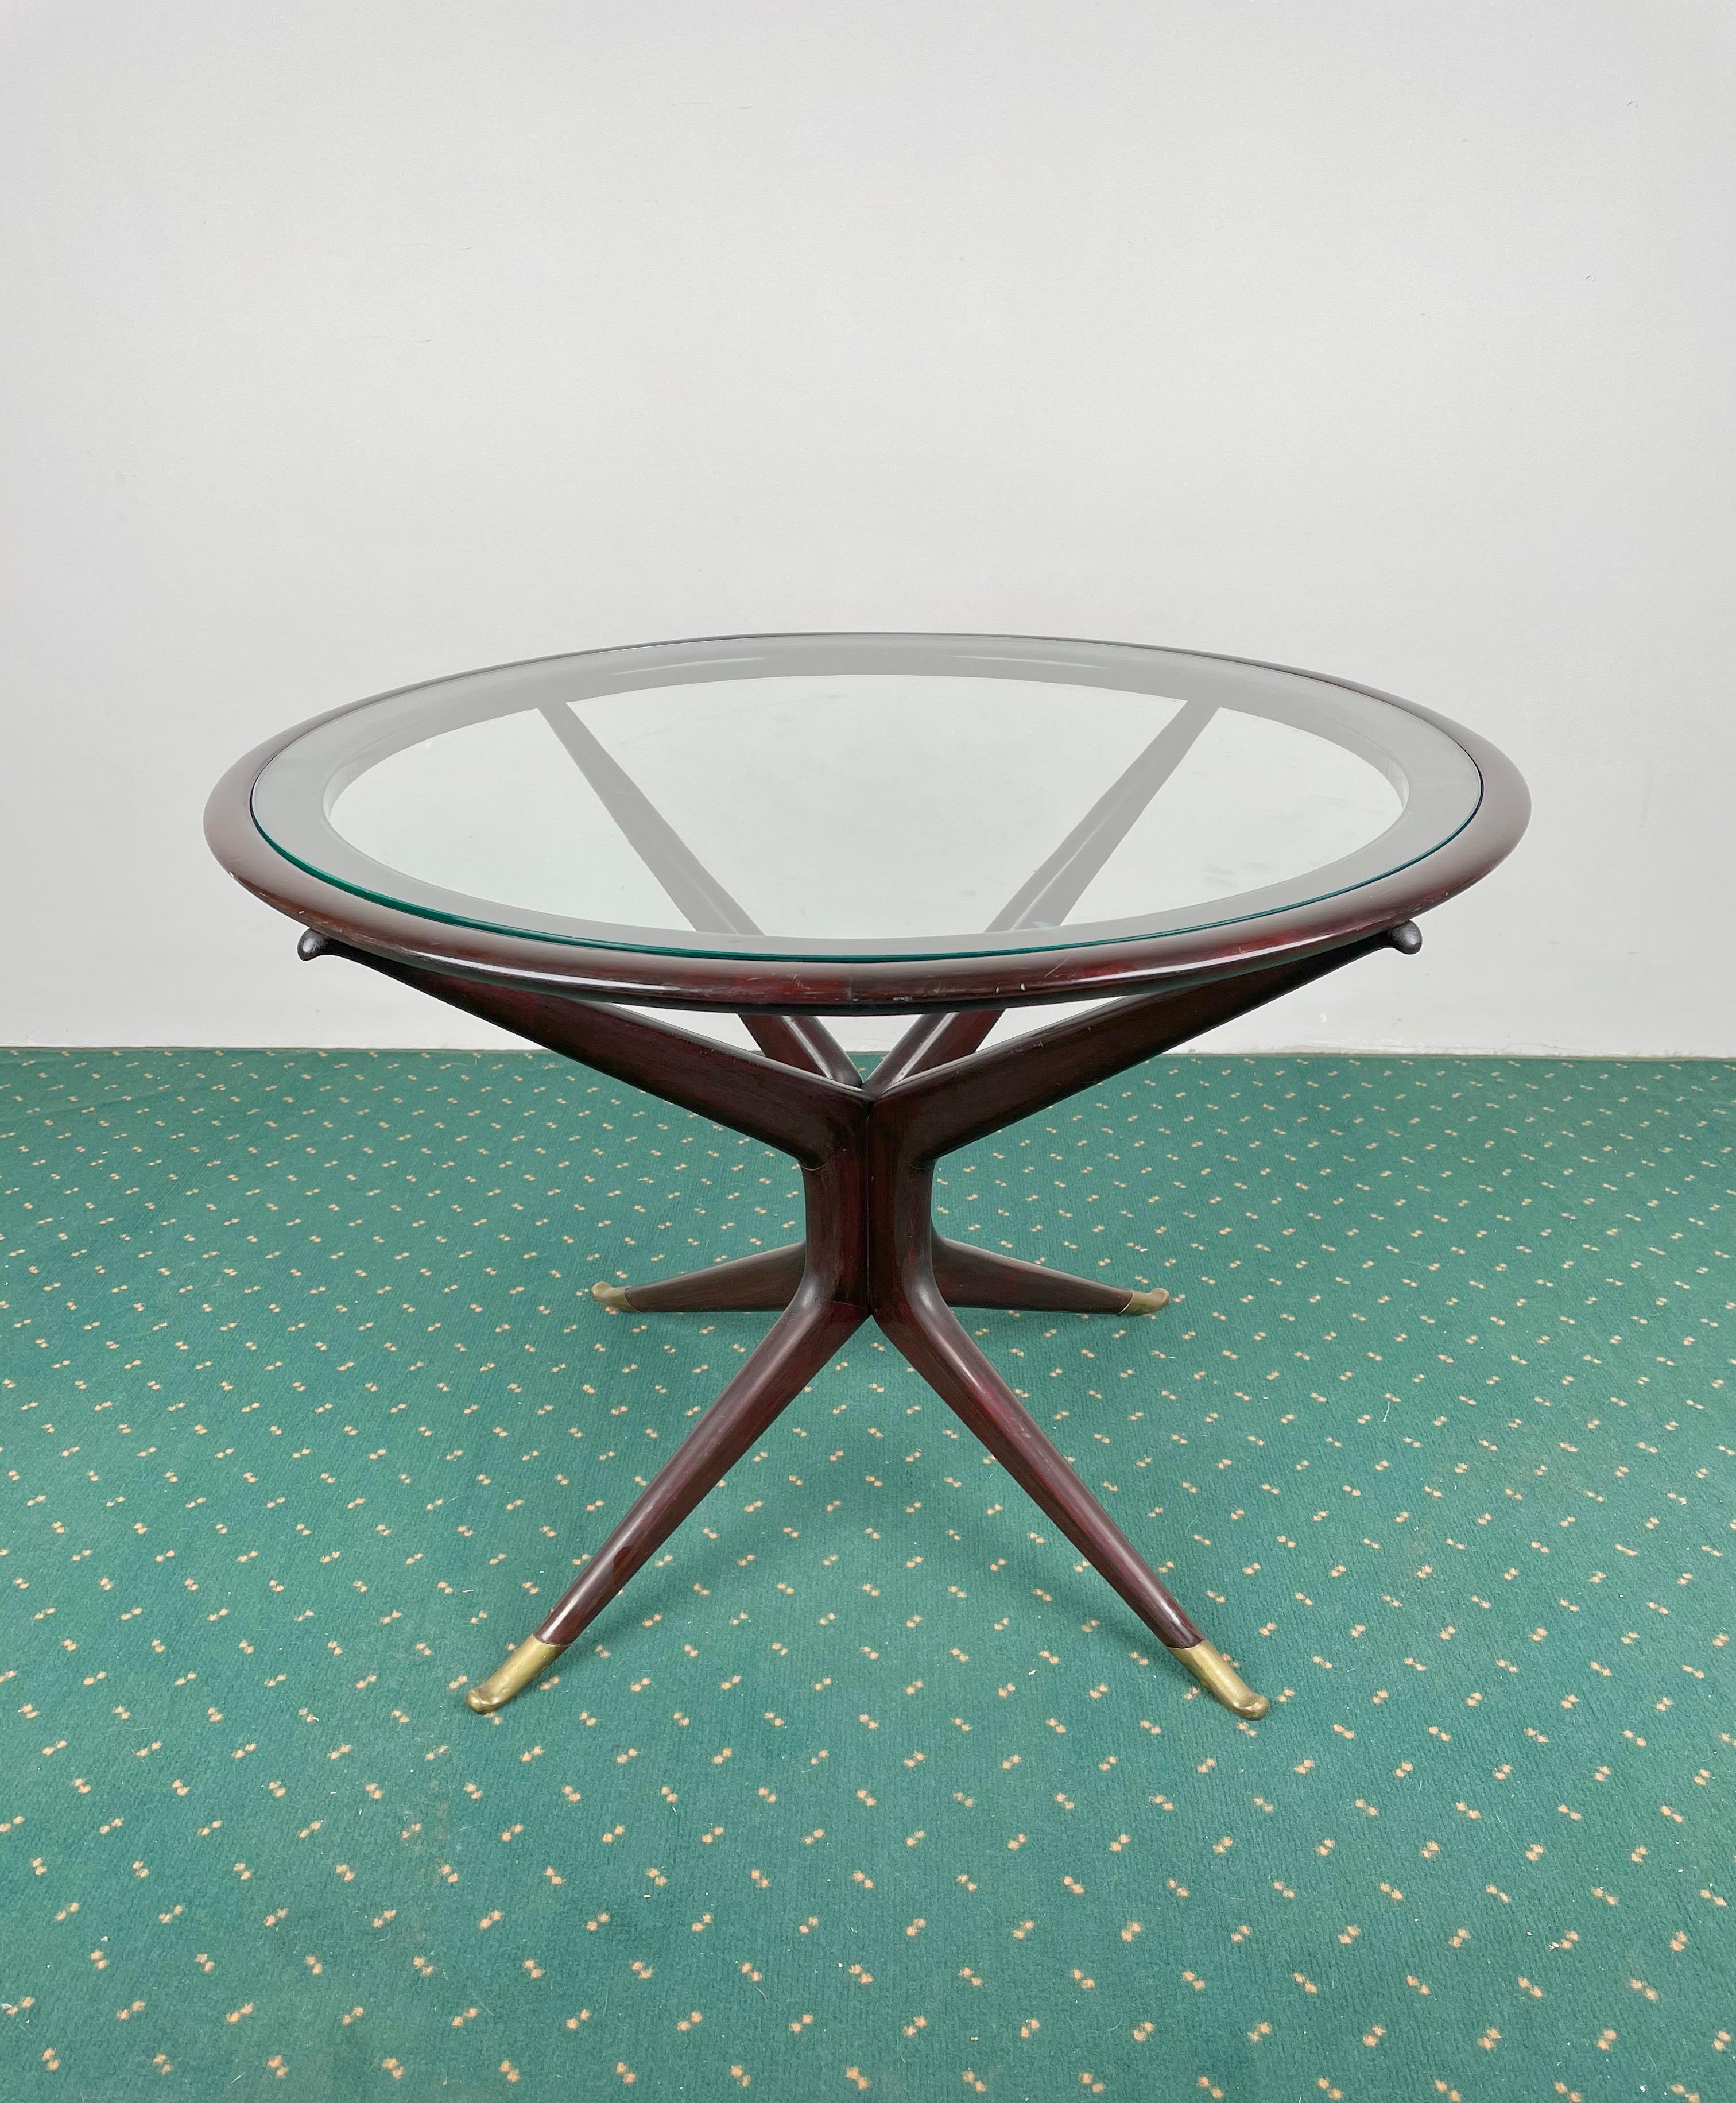 1950s Italian round coffee table in wood structure, brass feet and glass shelf attributed to the Italian designer Guglielmo Ulrich.